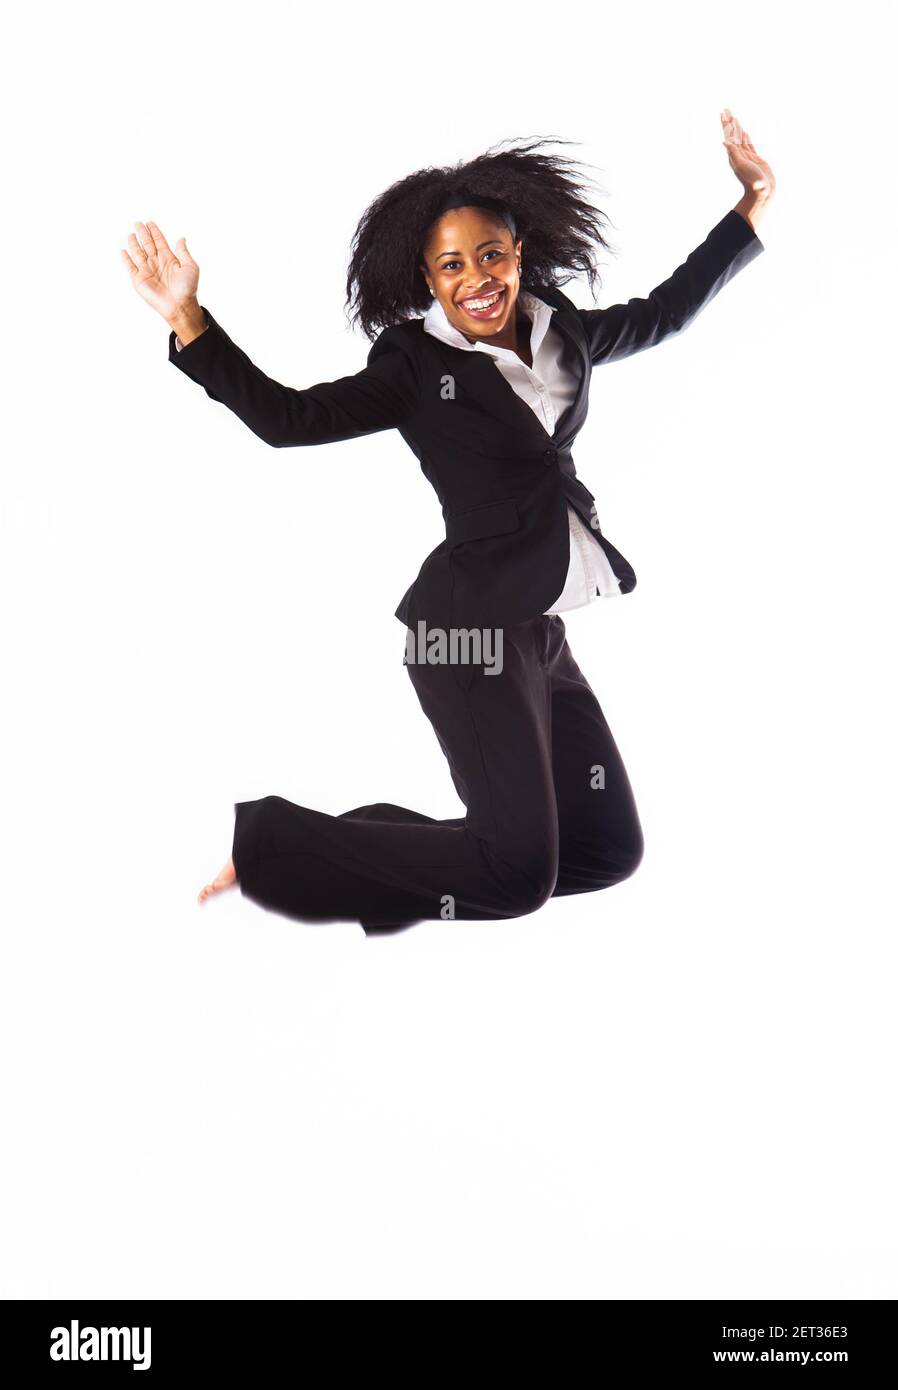 A woman in business attire jumping into the air. Isolated on a white background. Stock Photo